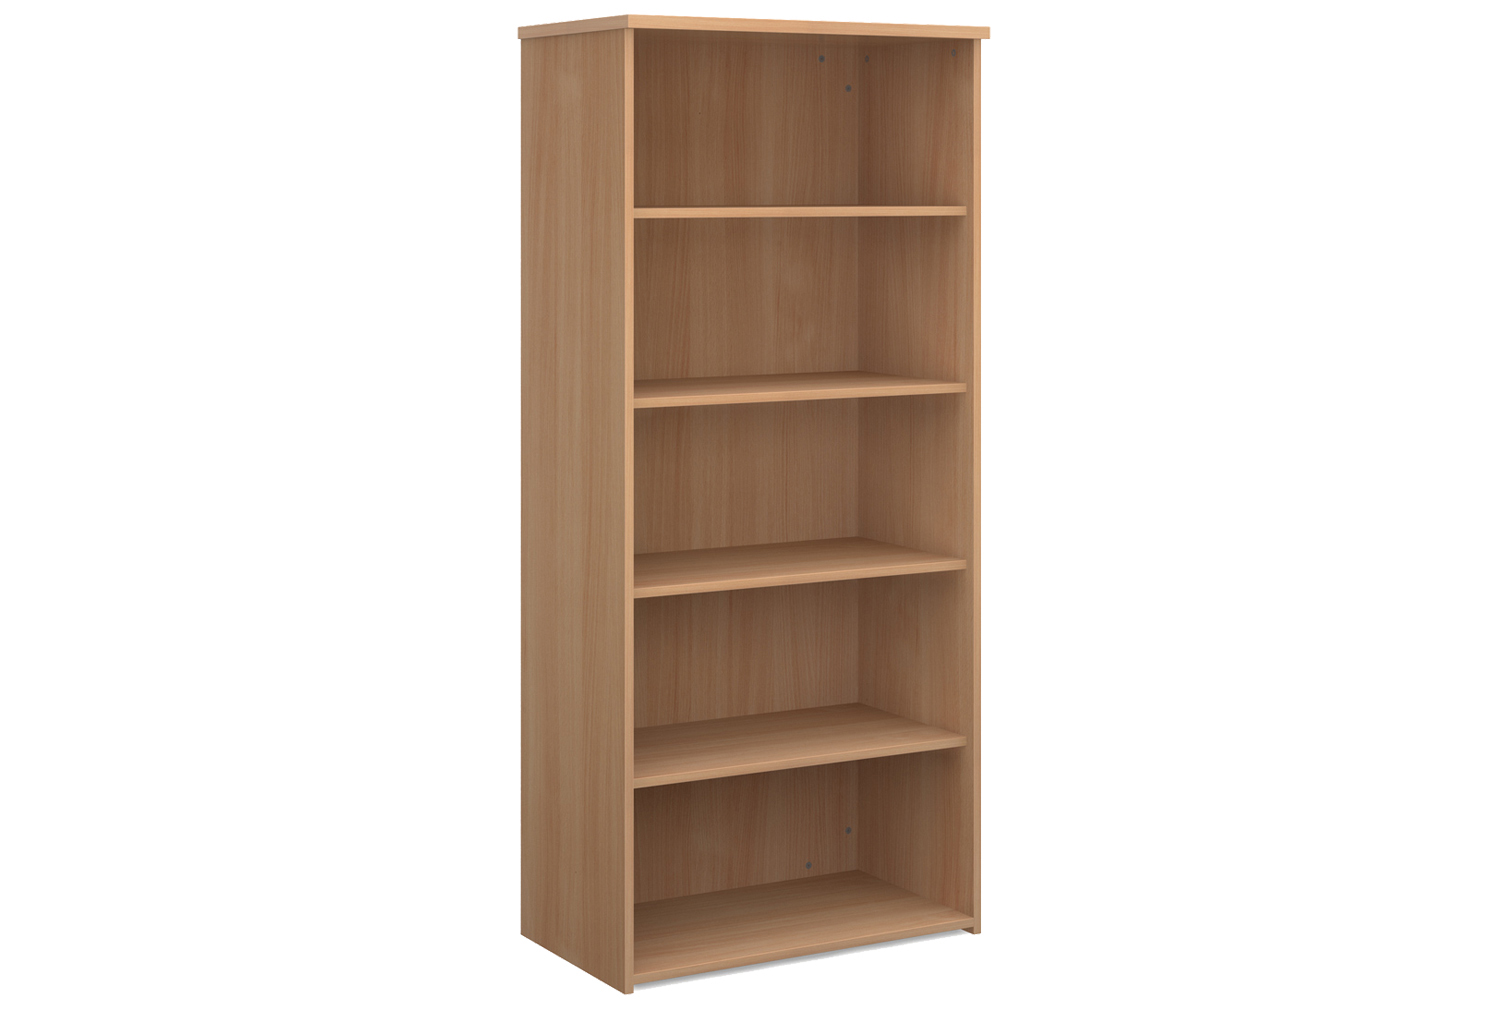 Value Line Office Bookcases, 4 Shelf - 80wx47dx179h (cm), Beech, Express Delivery